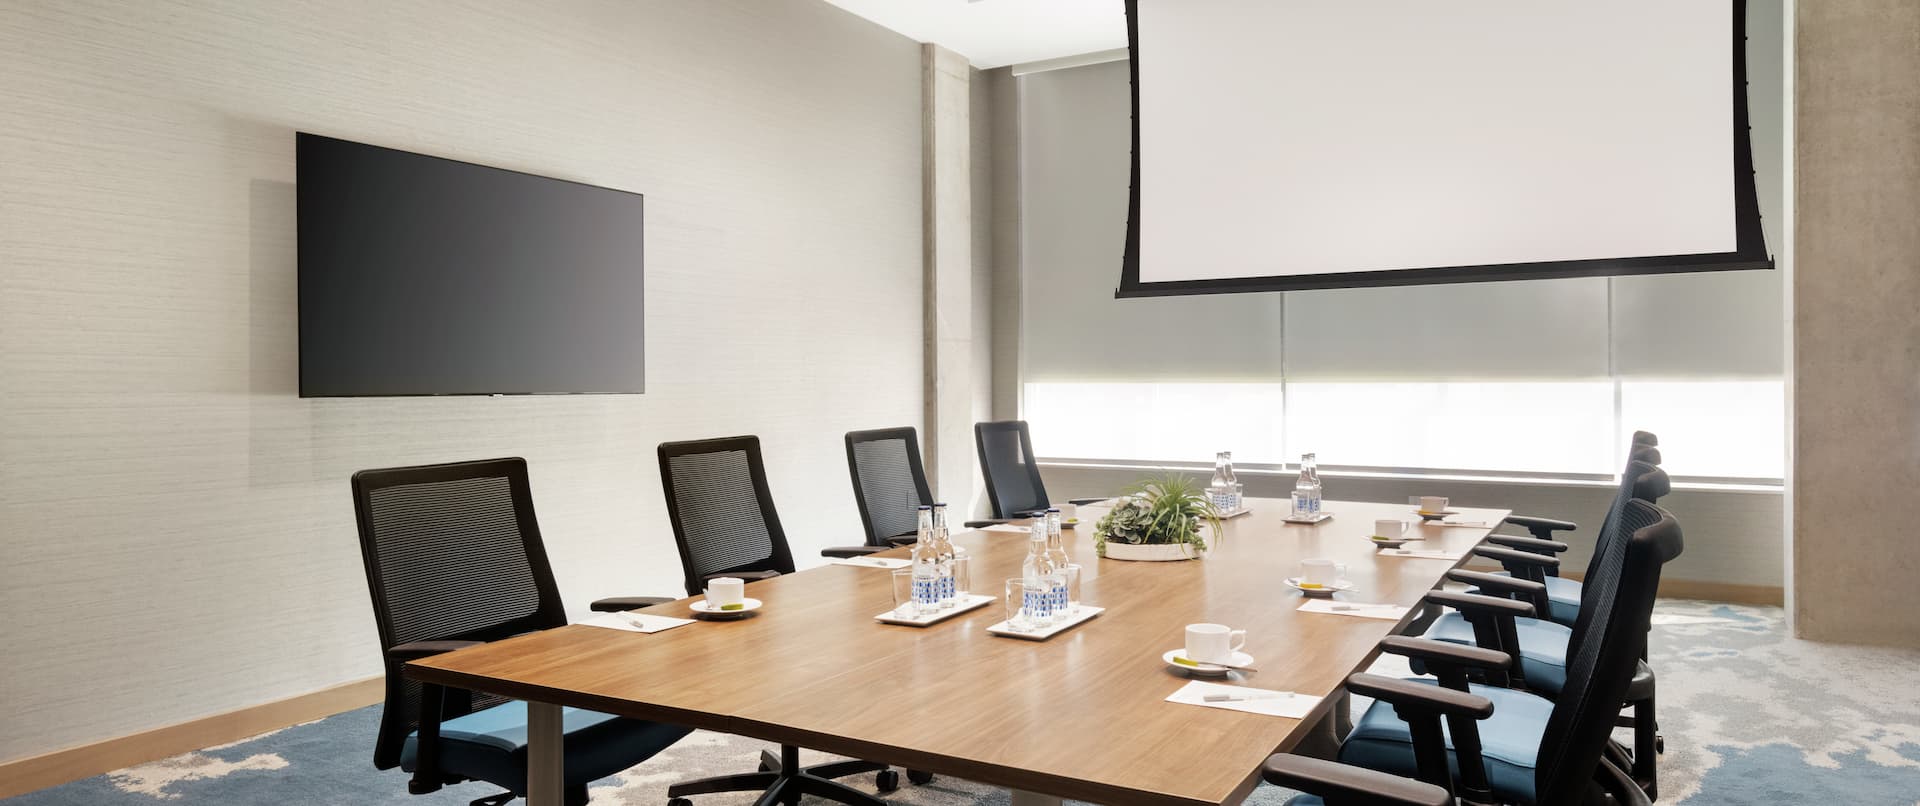 Bright meeting room featuring boardroom table, TV, and projector screen.